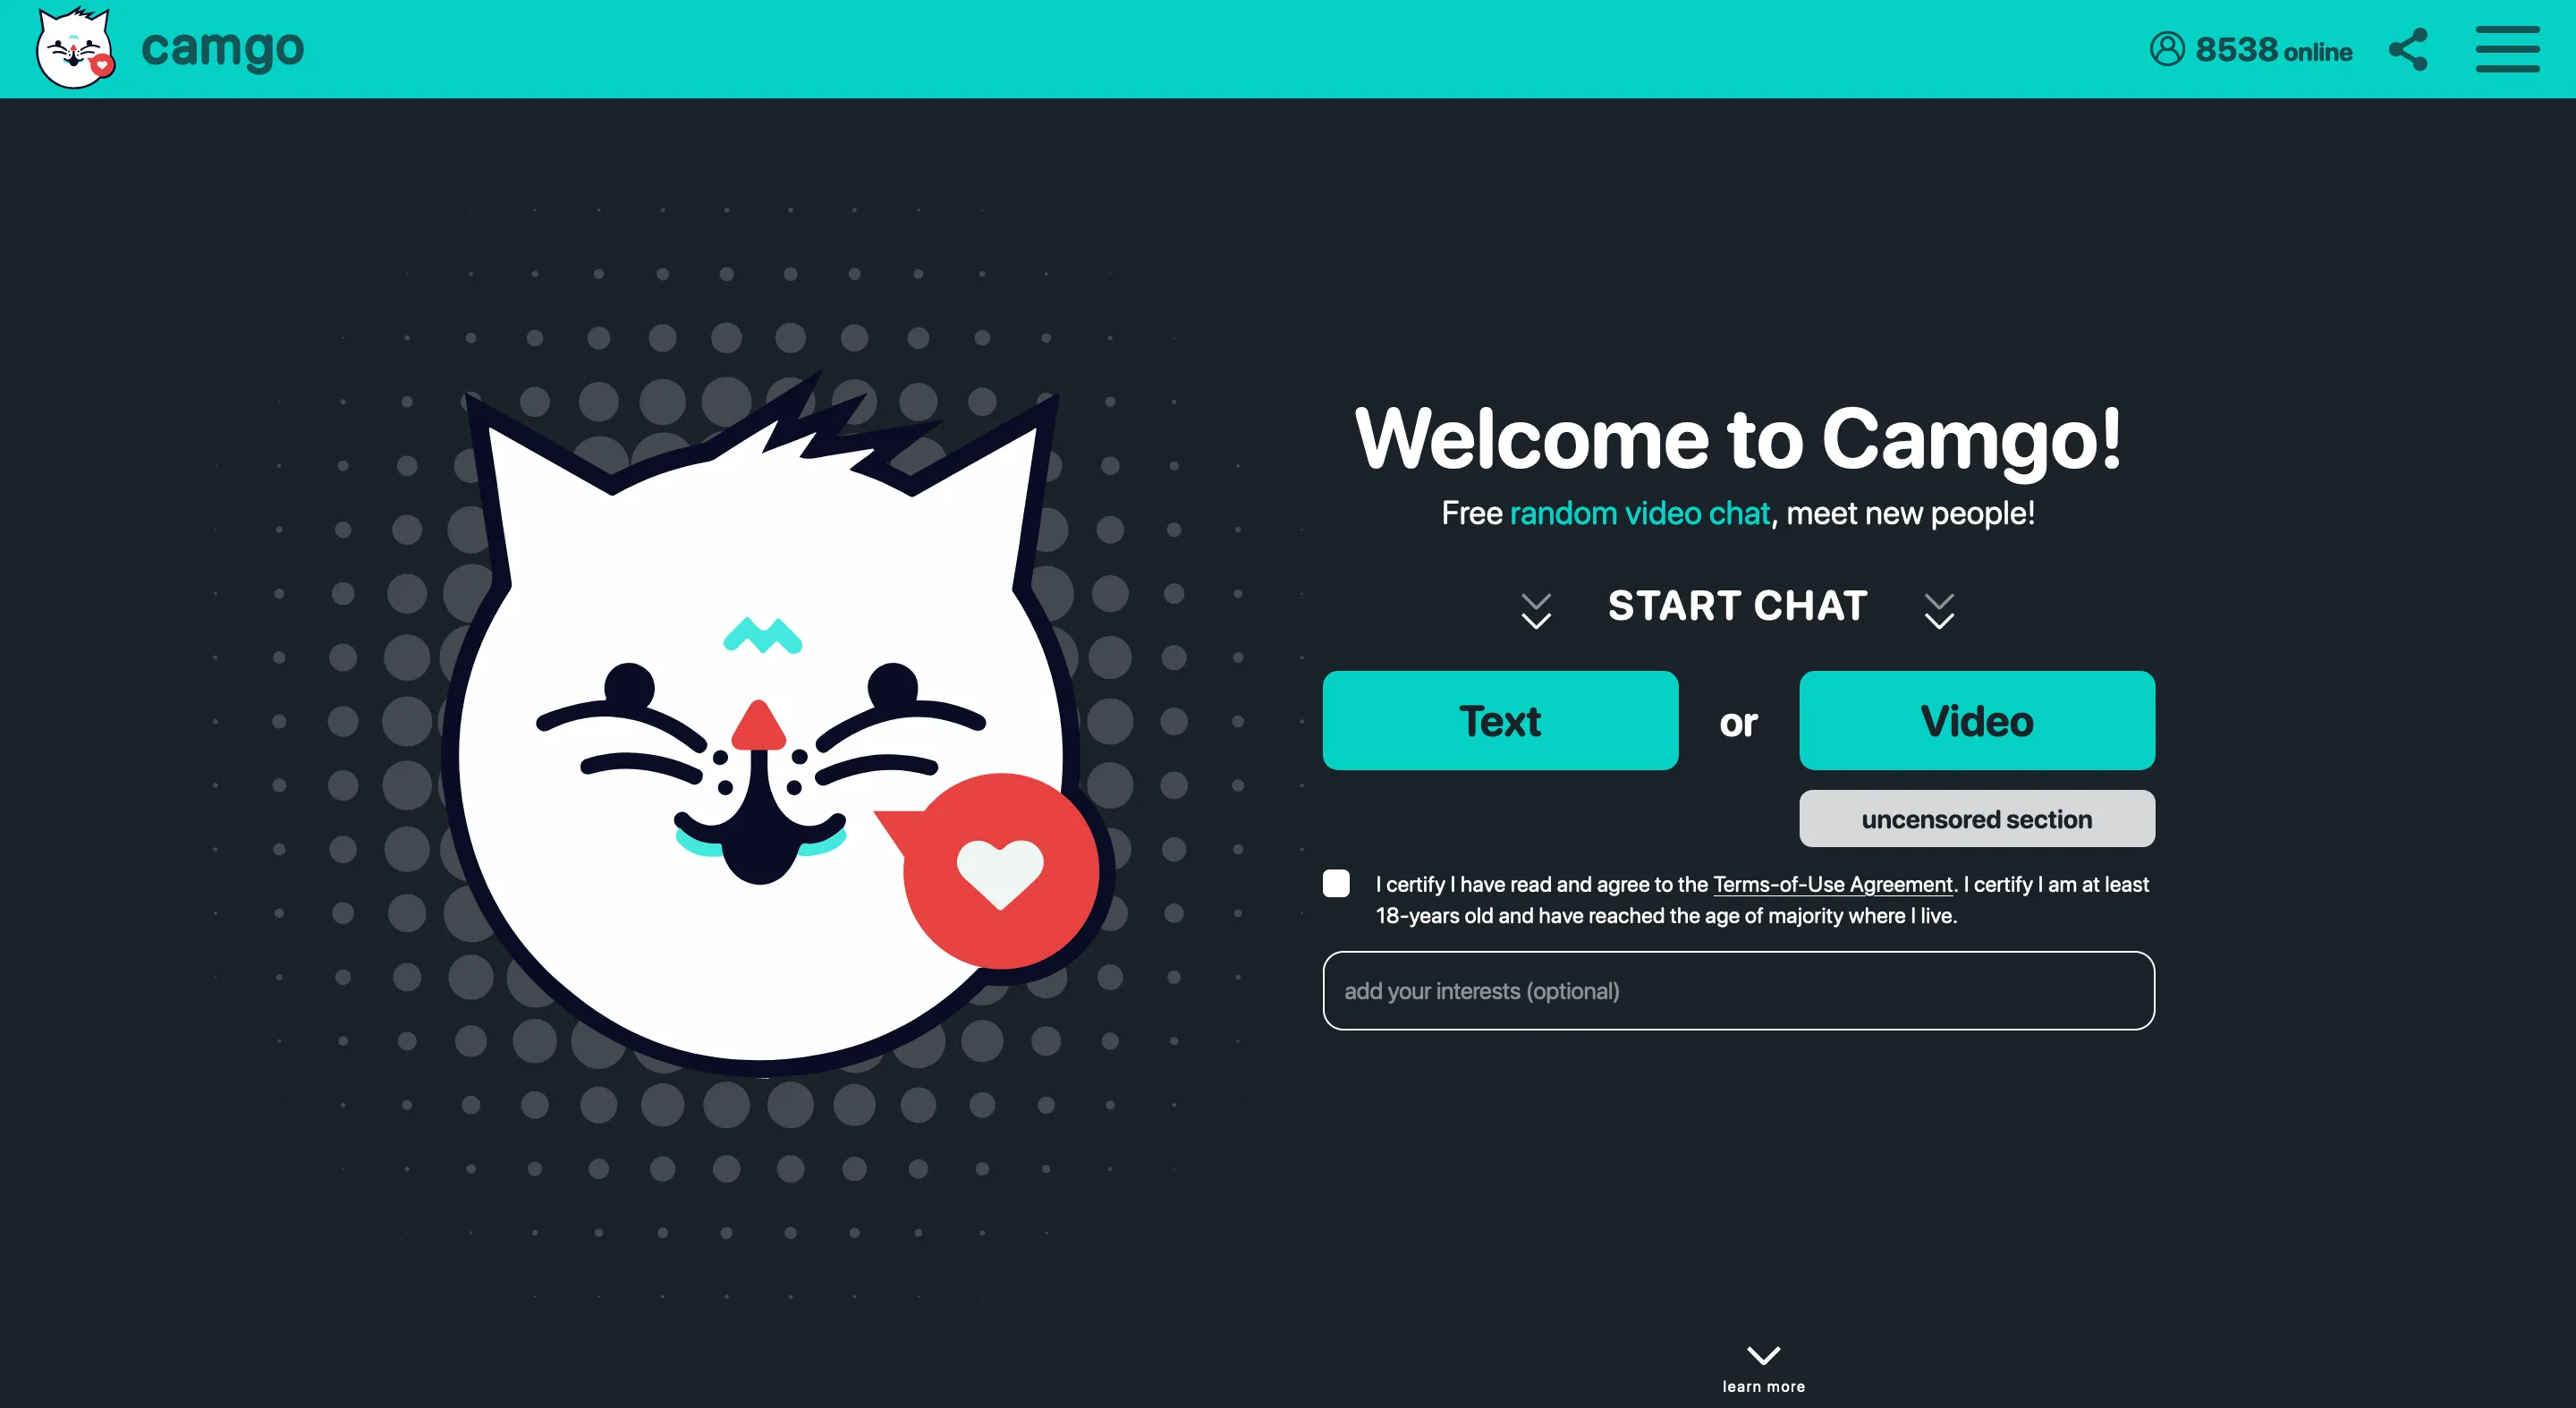 Here we go - the homepage of Camgo video chat! Just a cool white logo with slick typography and cute cartoon cat. Our whiskered feline friend is drawn winking with a big ol' friendly smile. And check out that fun curly tail! This fun mascot captures Camgo's laidback, playful vibe. Makes me wanna dive right in and start chatting up some strangers! If you're seeking a vibrant online community to beat boredom, this website hits the spot. So read on to learn all about Camgo - it just might become your new fave app!